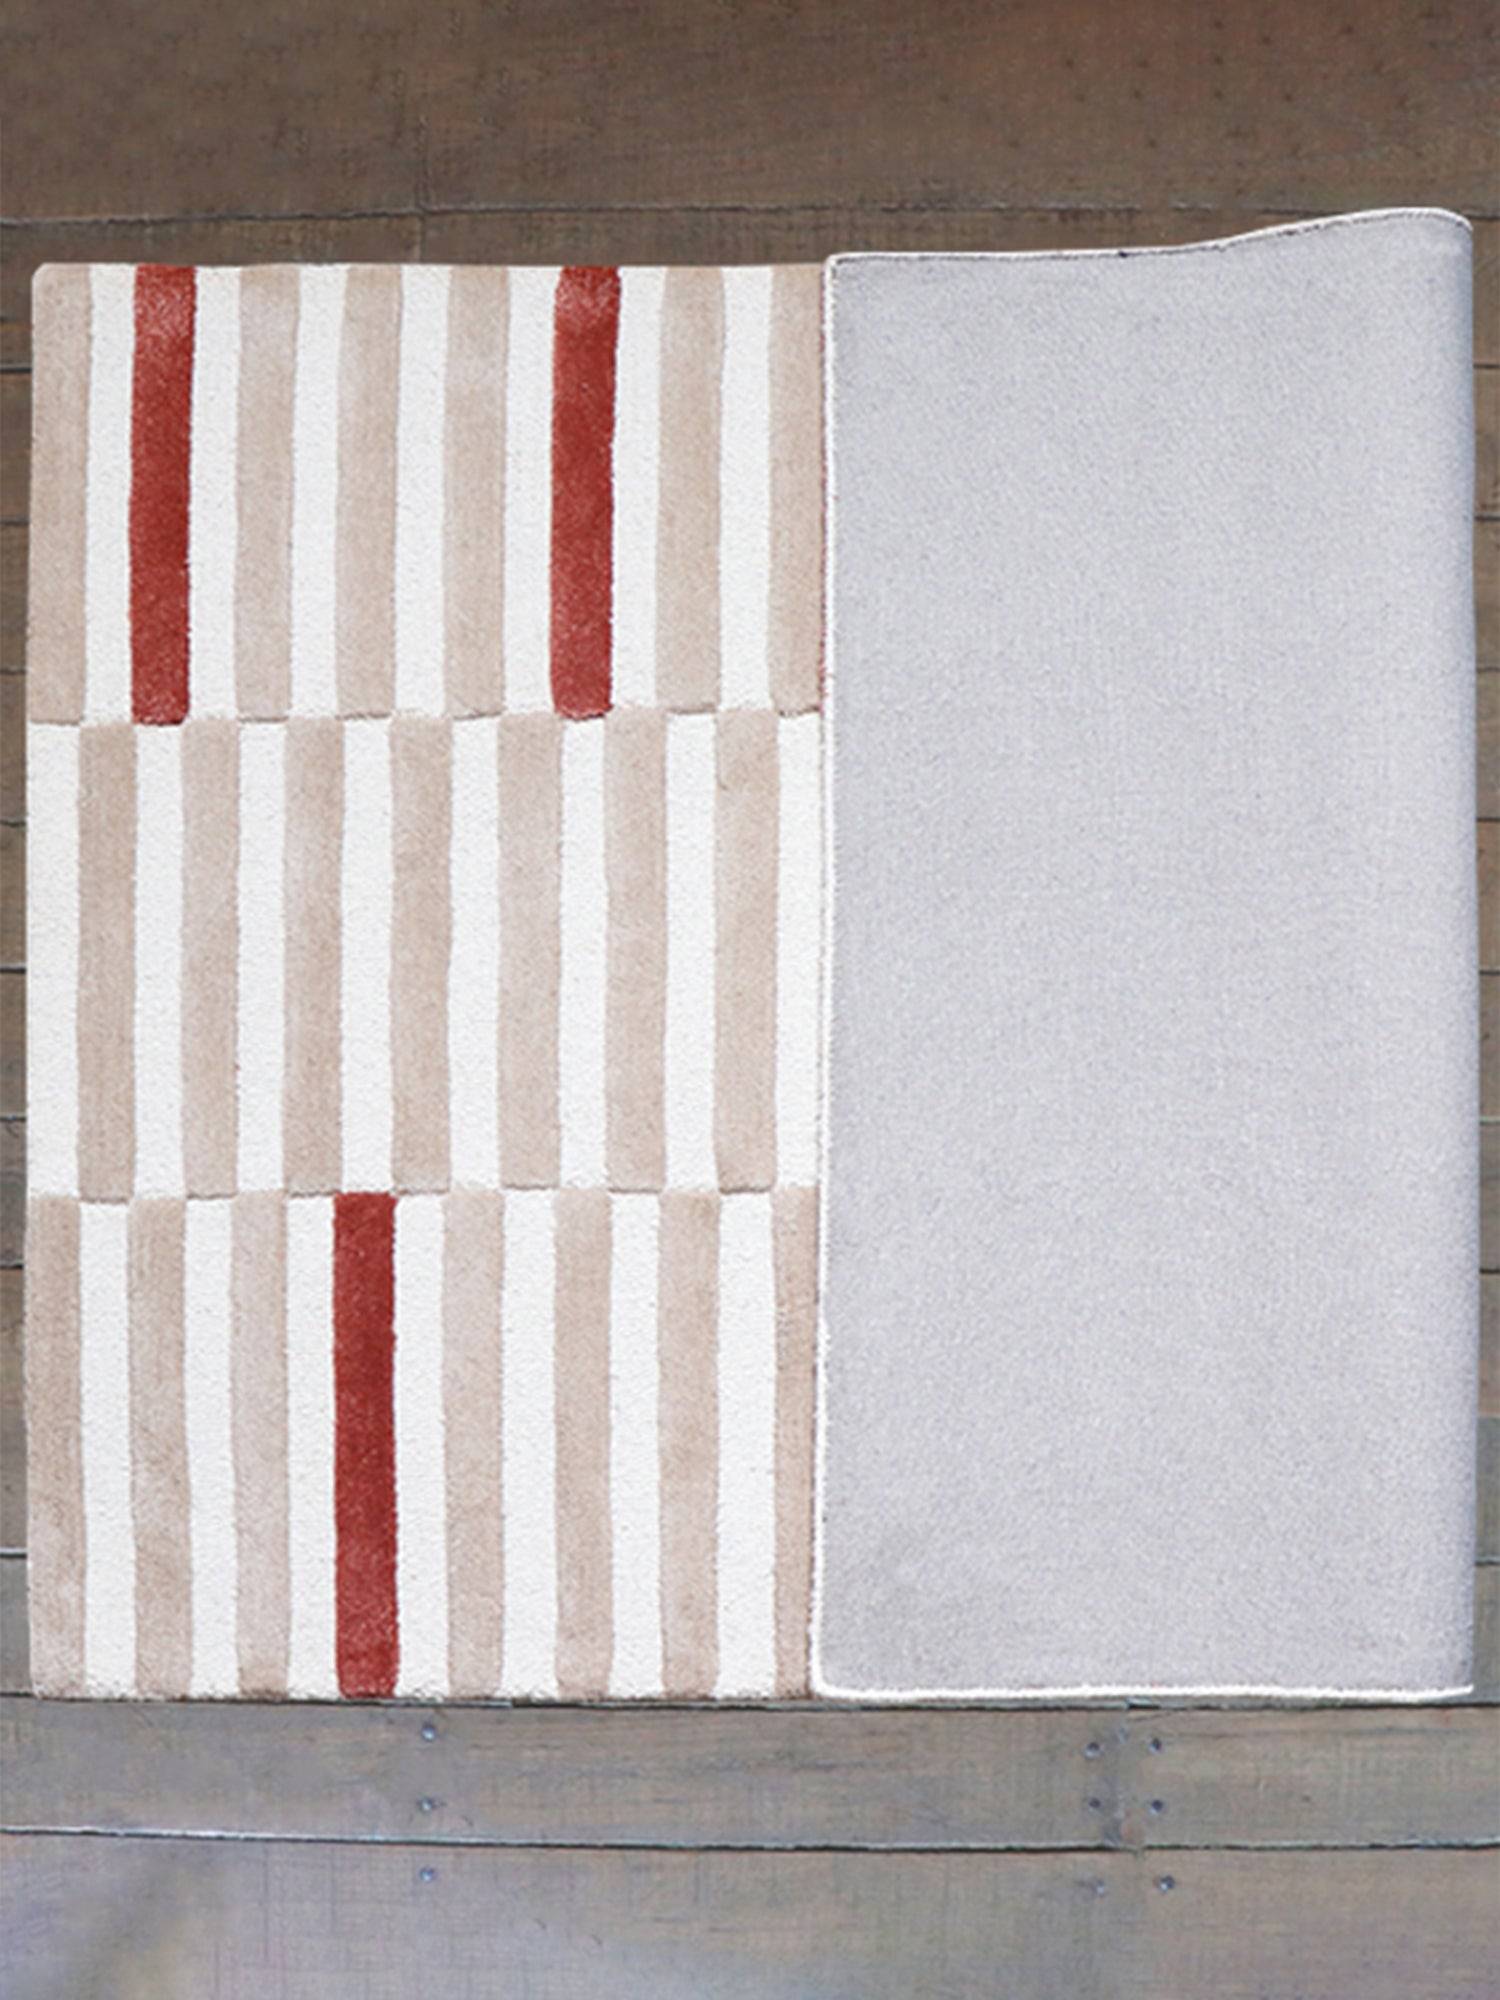 Carpet Hand Tufted 100% Woollen Geometric Lines Offwhite, Mushroom And Terra  - 4ft X 6ft